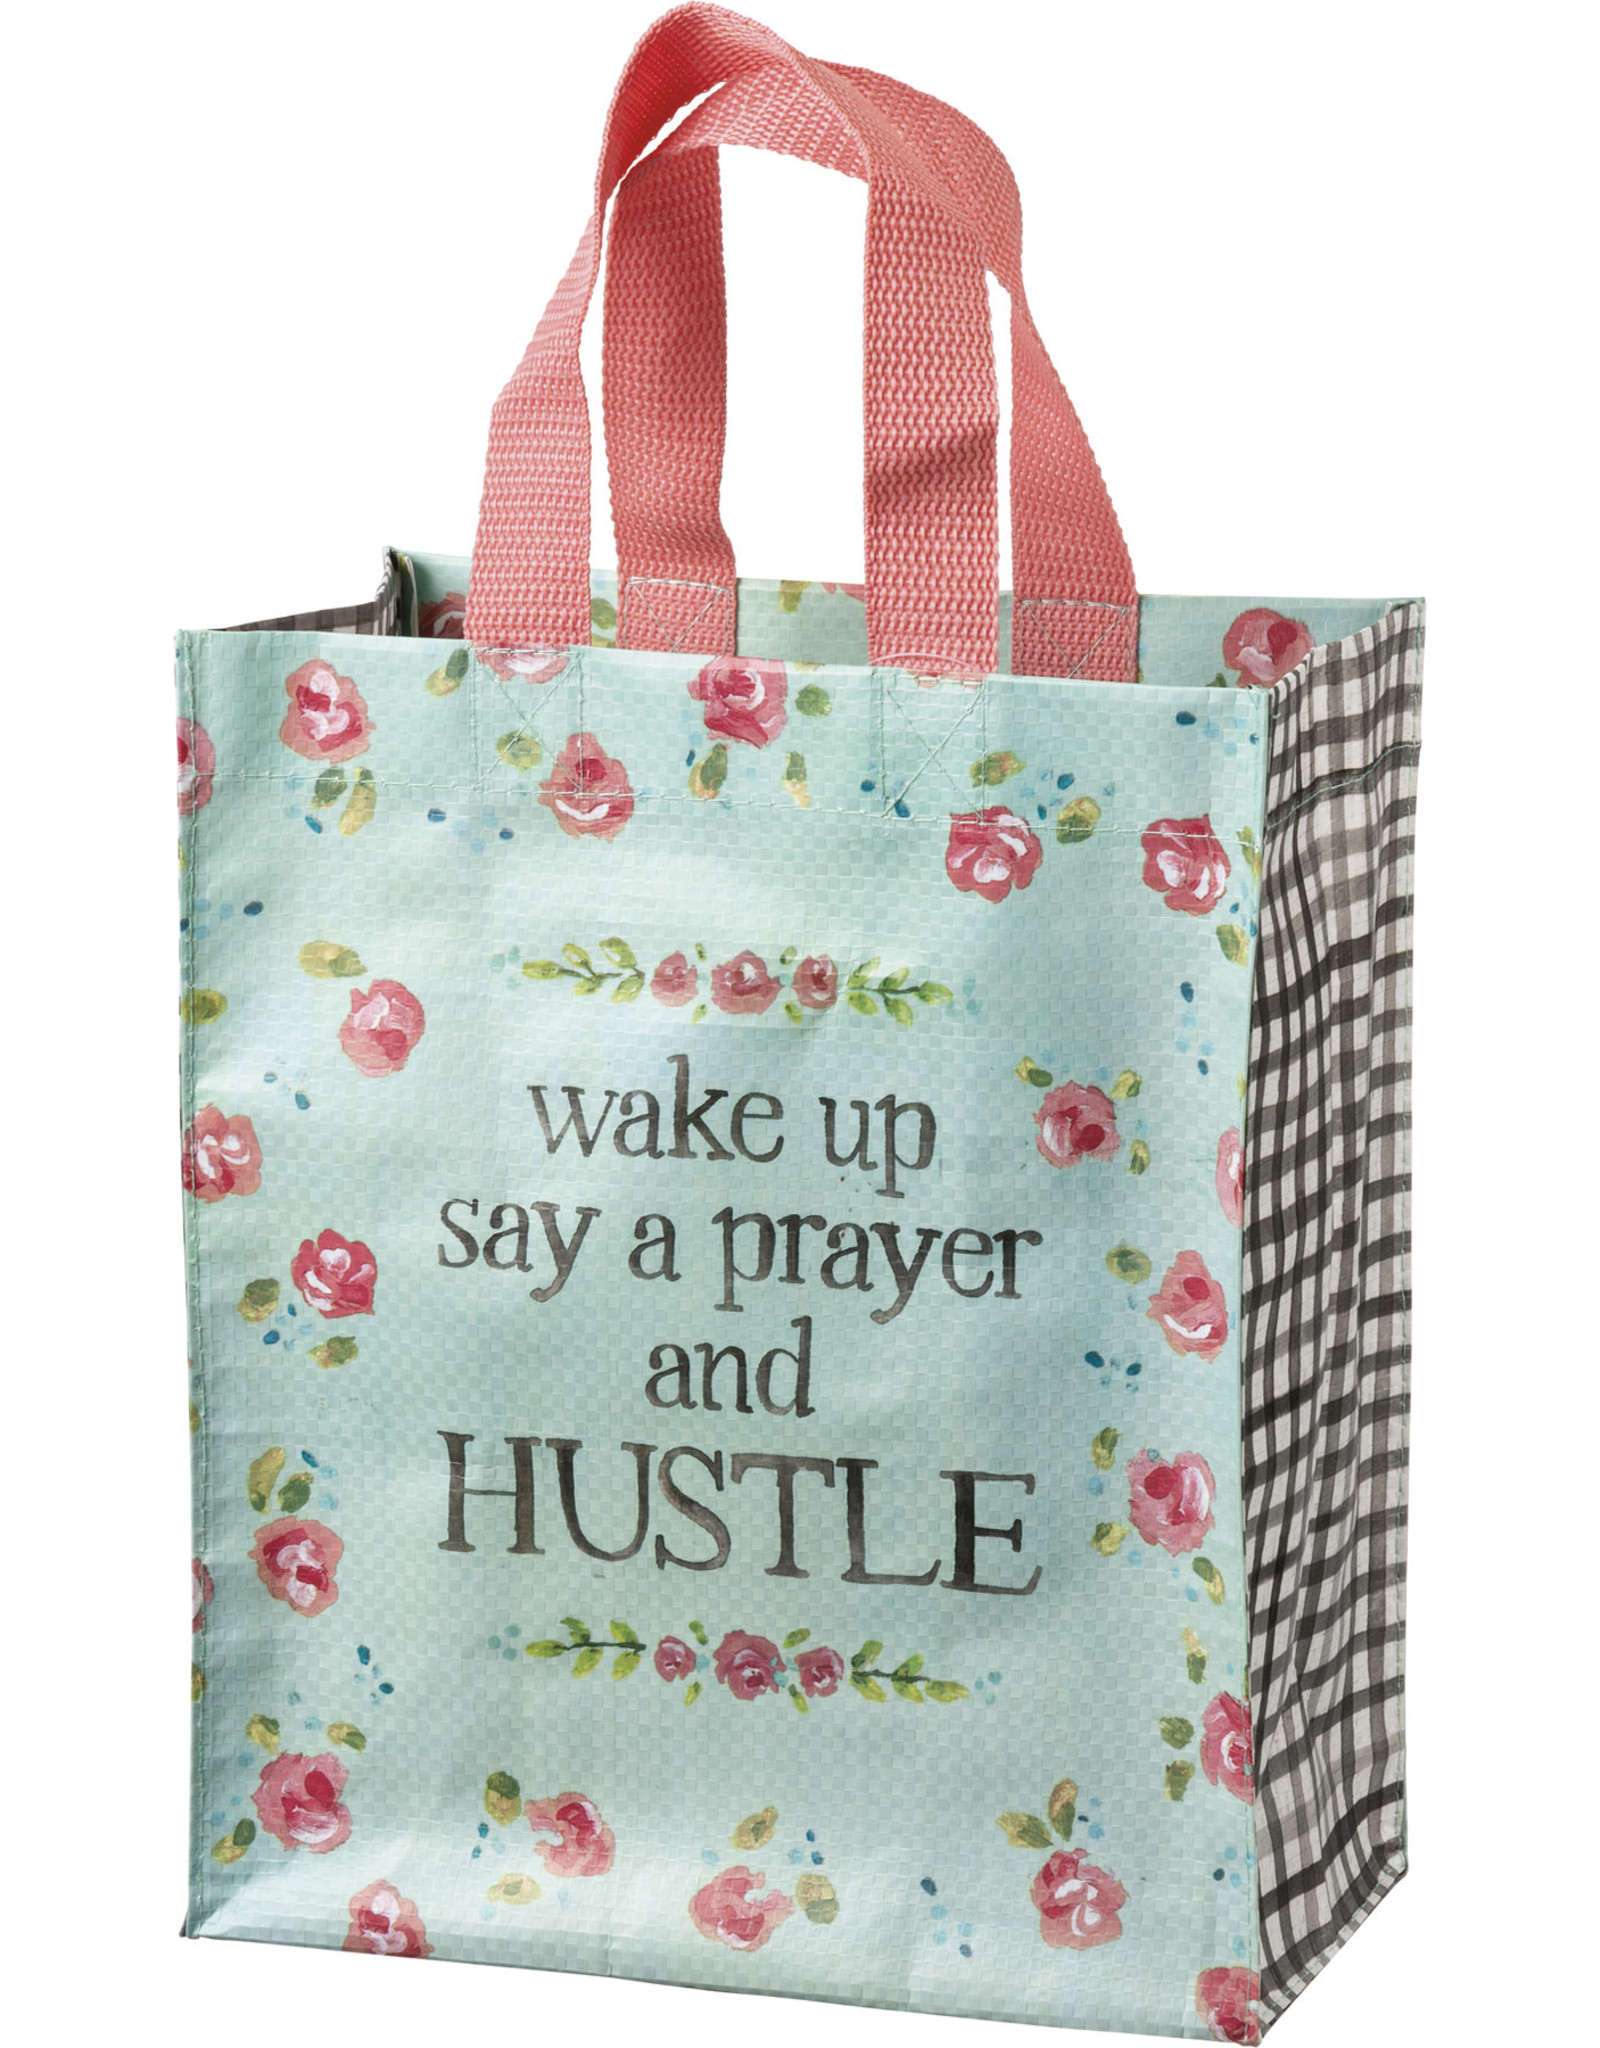 Daily Tote - Hustle